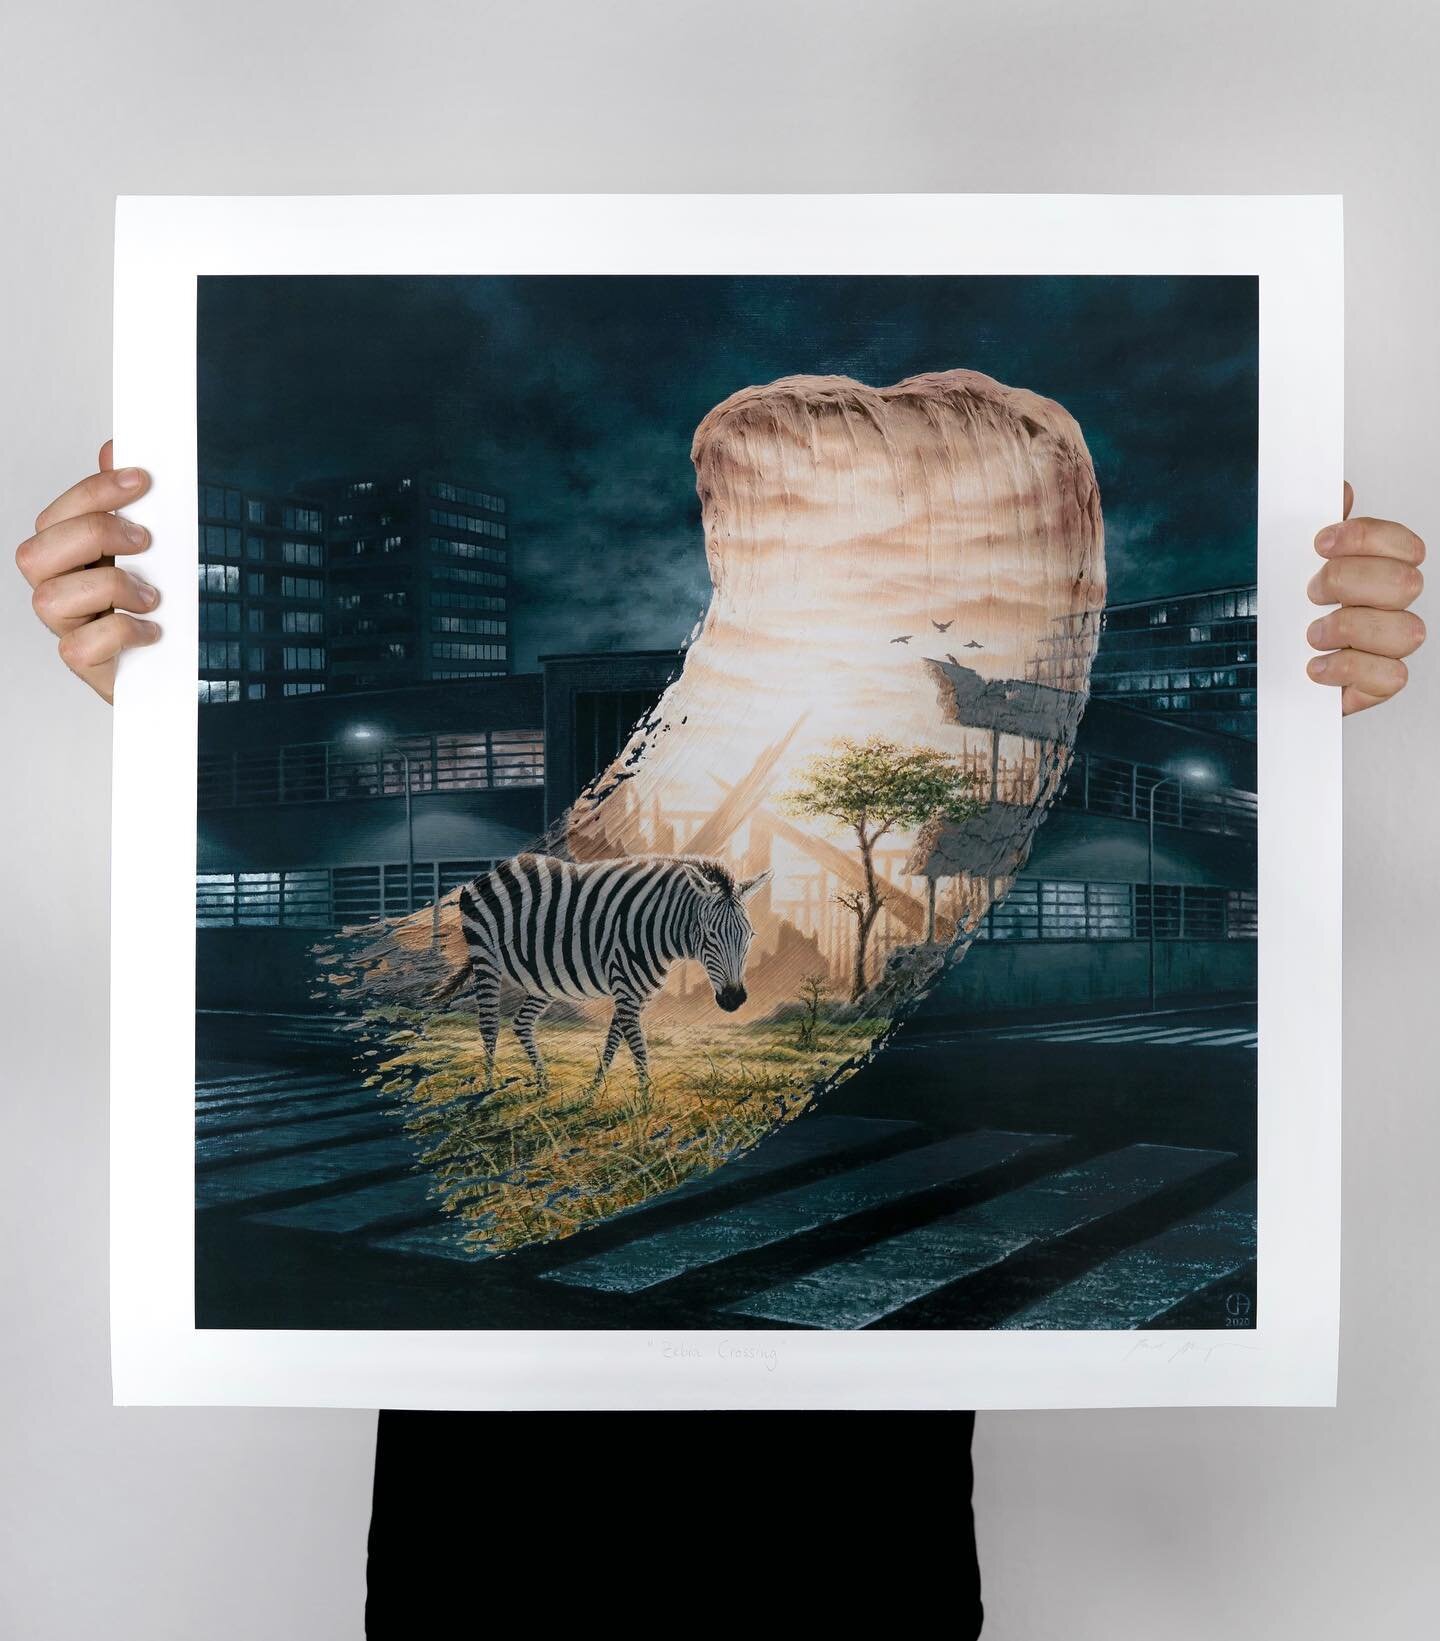 - Excited to announce that the first limited edition print of the year will be released tomorrow, March 16th, 8pm UTC, alongside restocked open edition prints. 

'Zebra Crossing' - Limited Edition of 50
- Giclée print on matte 308gsm Hahnemühne Pho